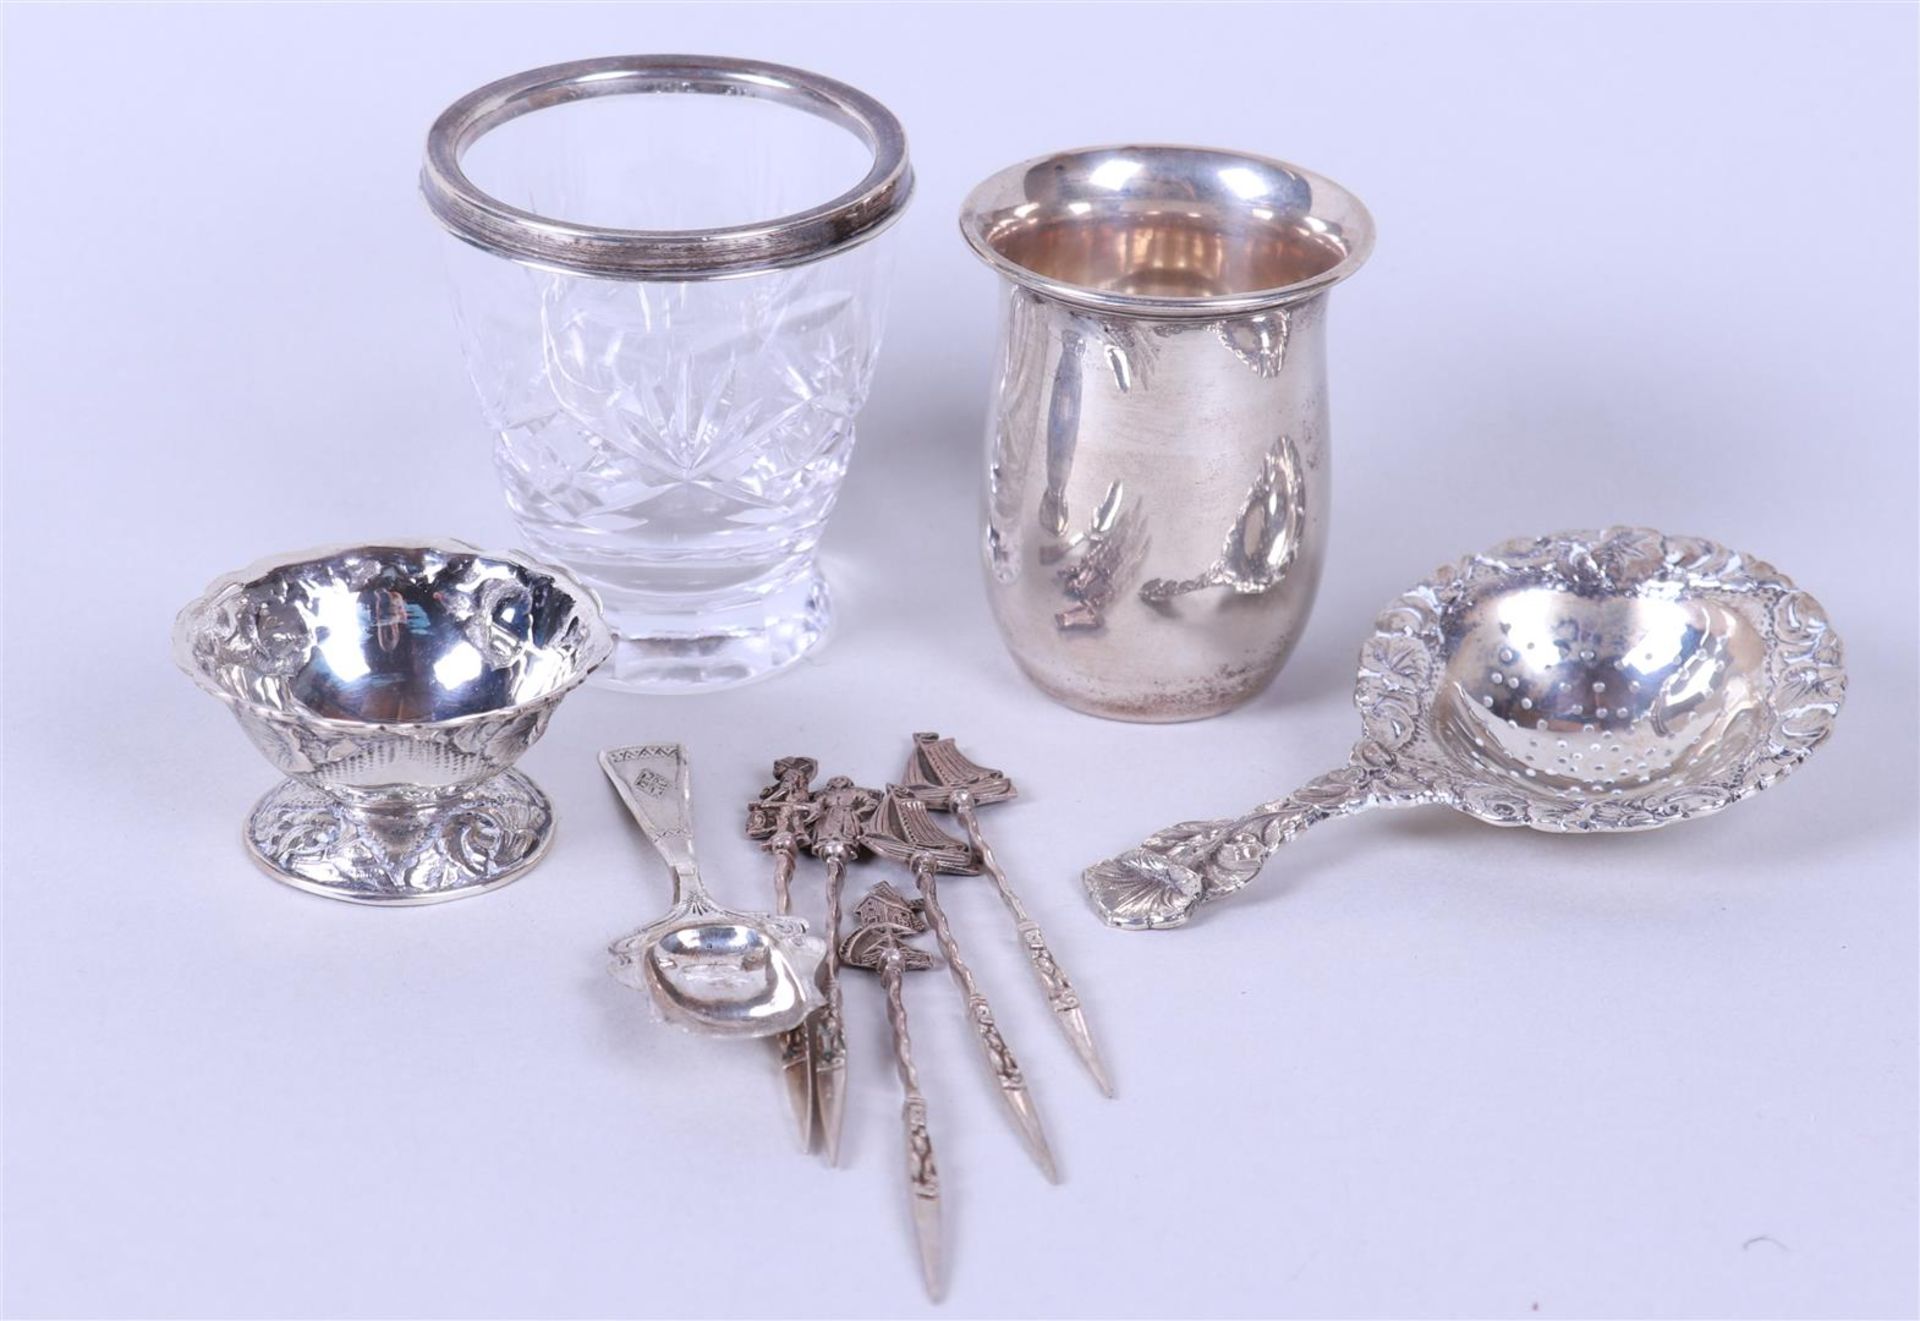 Lot of various silver. Consists of a tea strainer with holder, a spoon vase with 6 cocktail sticks, 